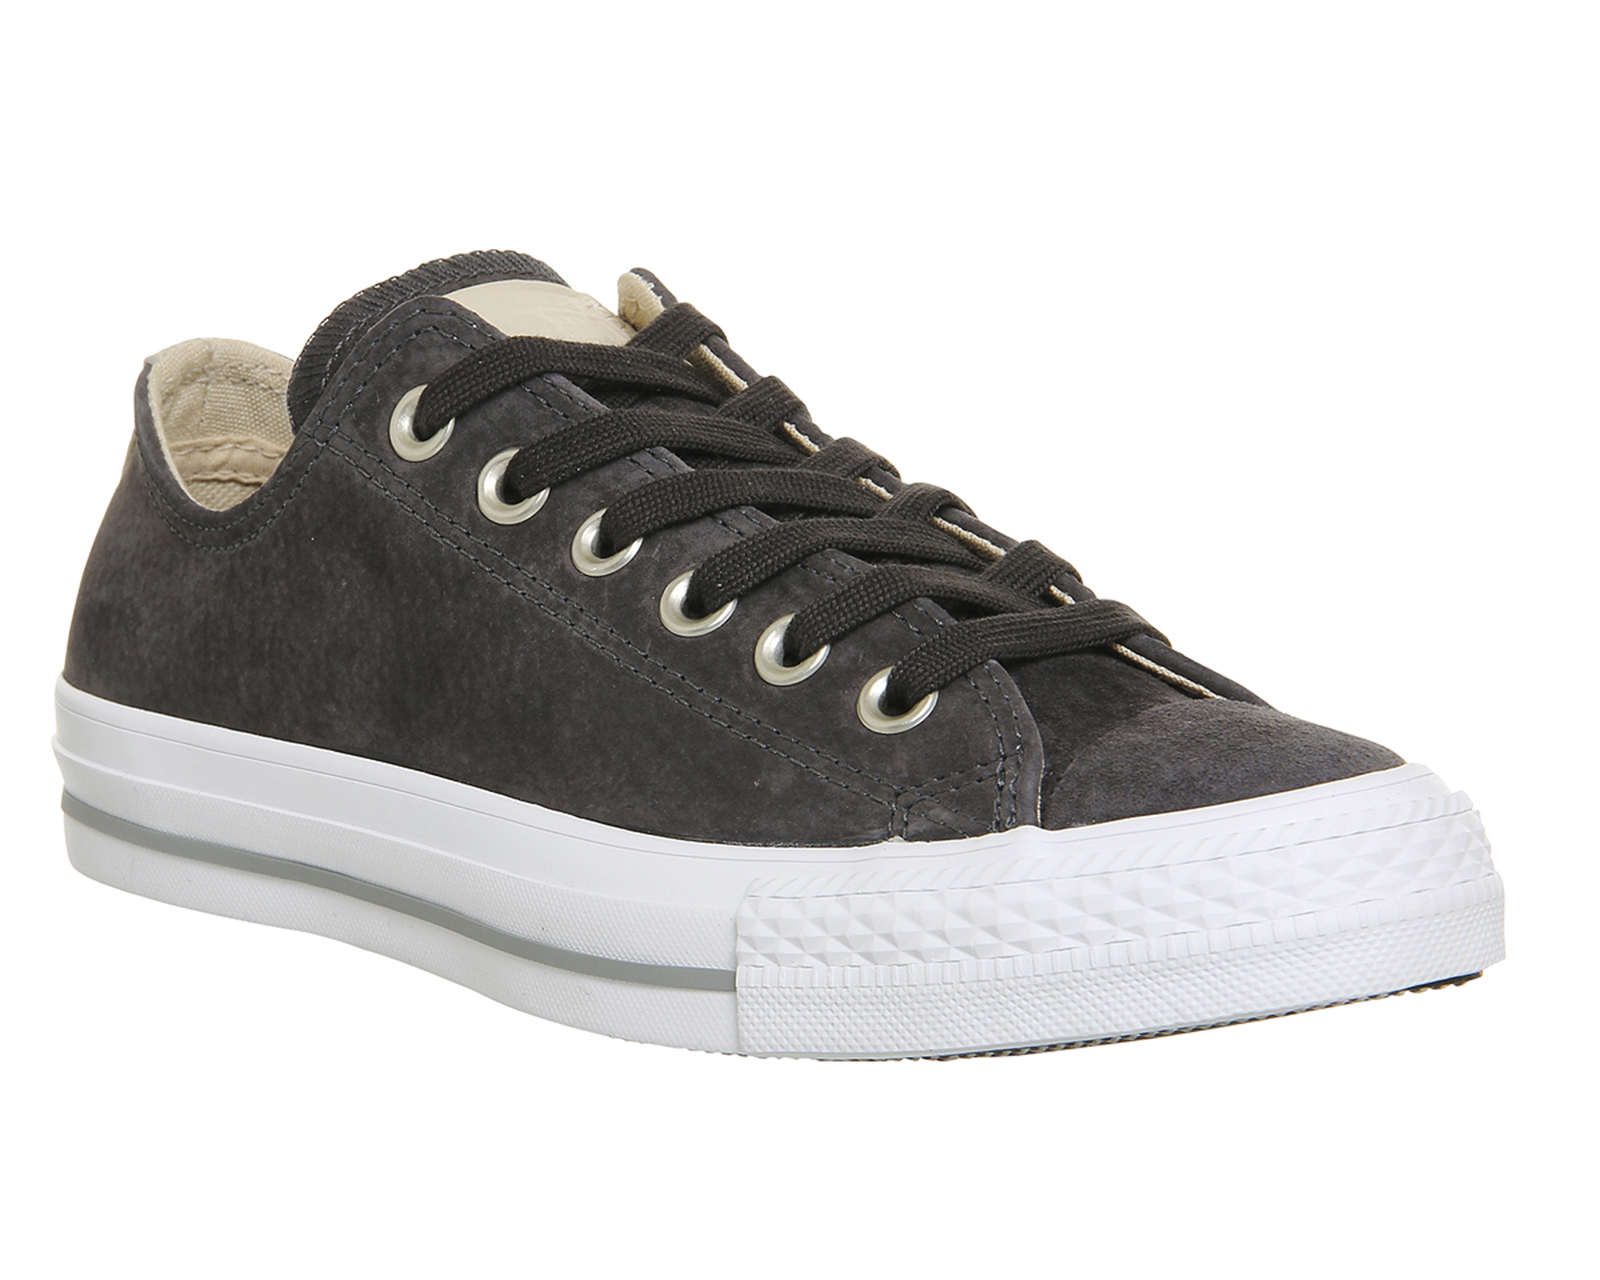 ConverseConverse All Star LowAlmost Black Ivory Suede